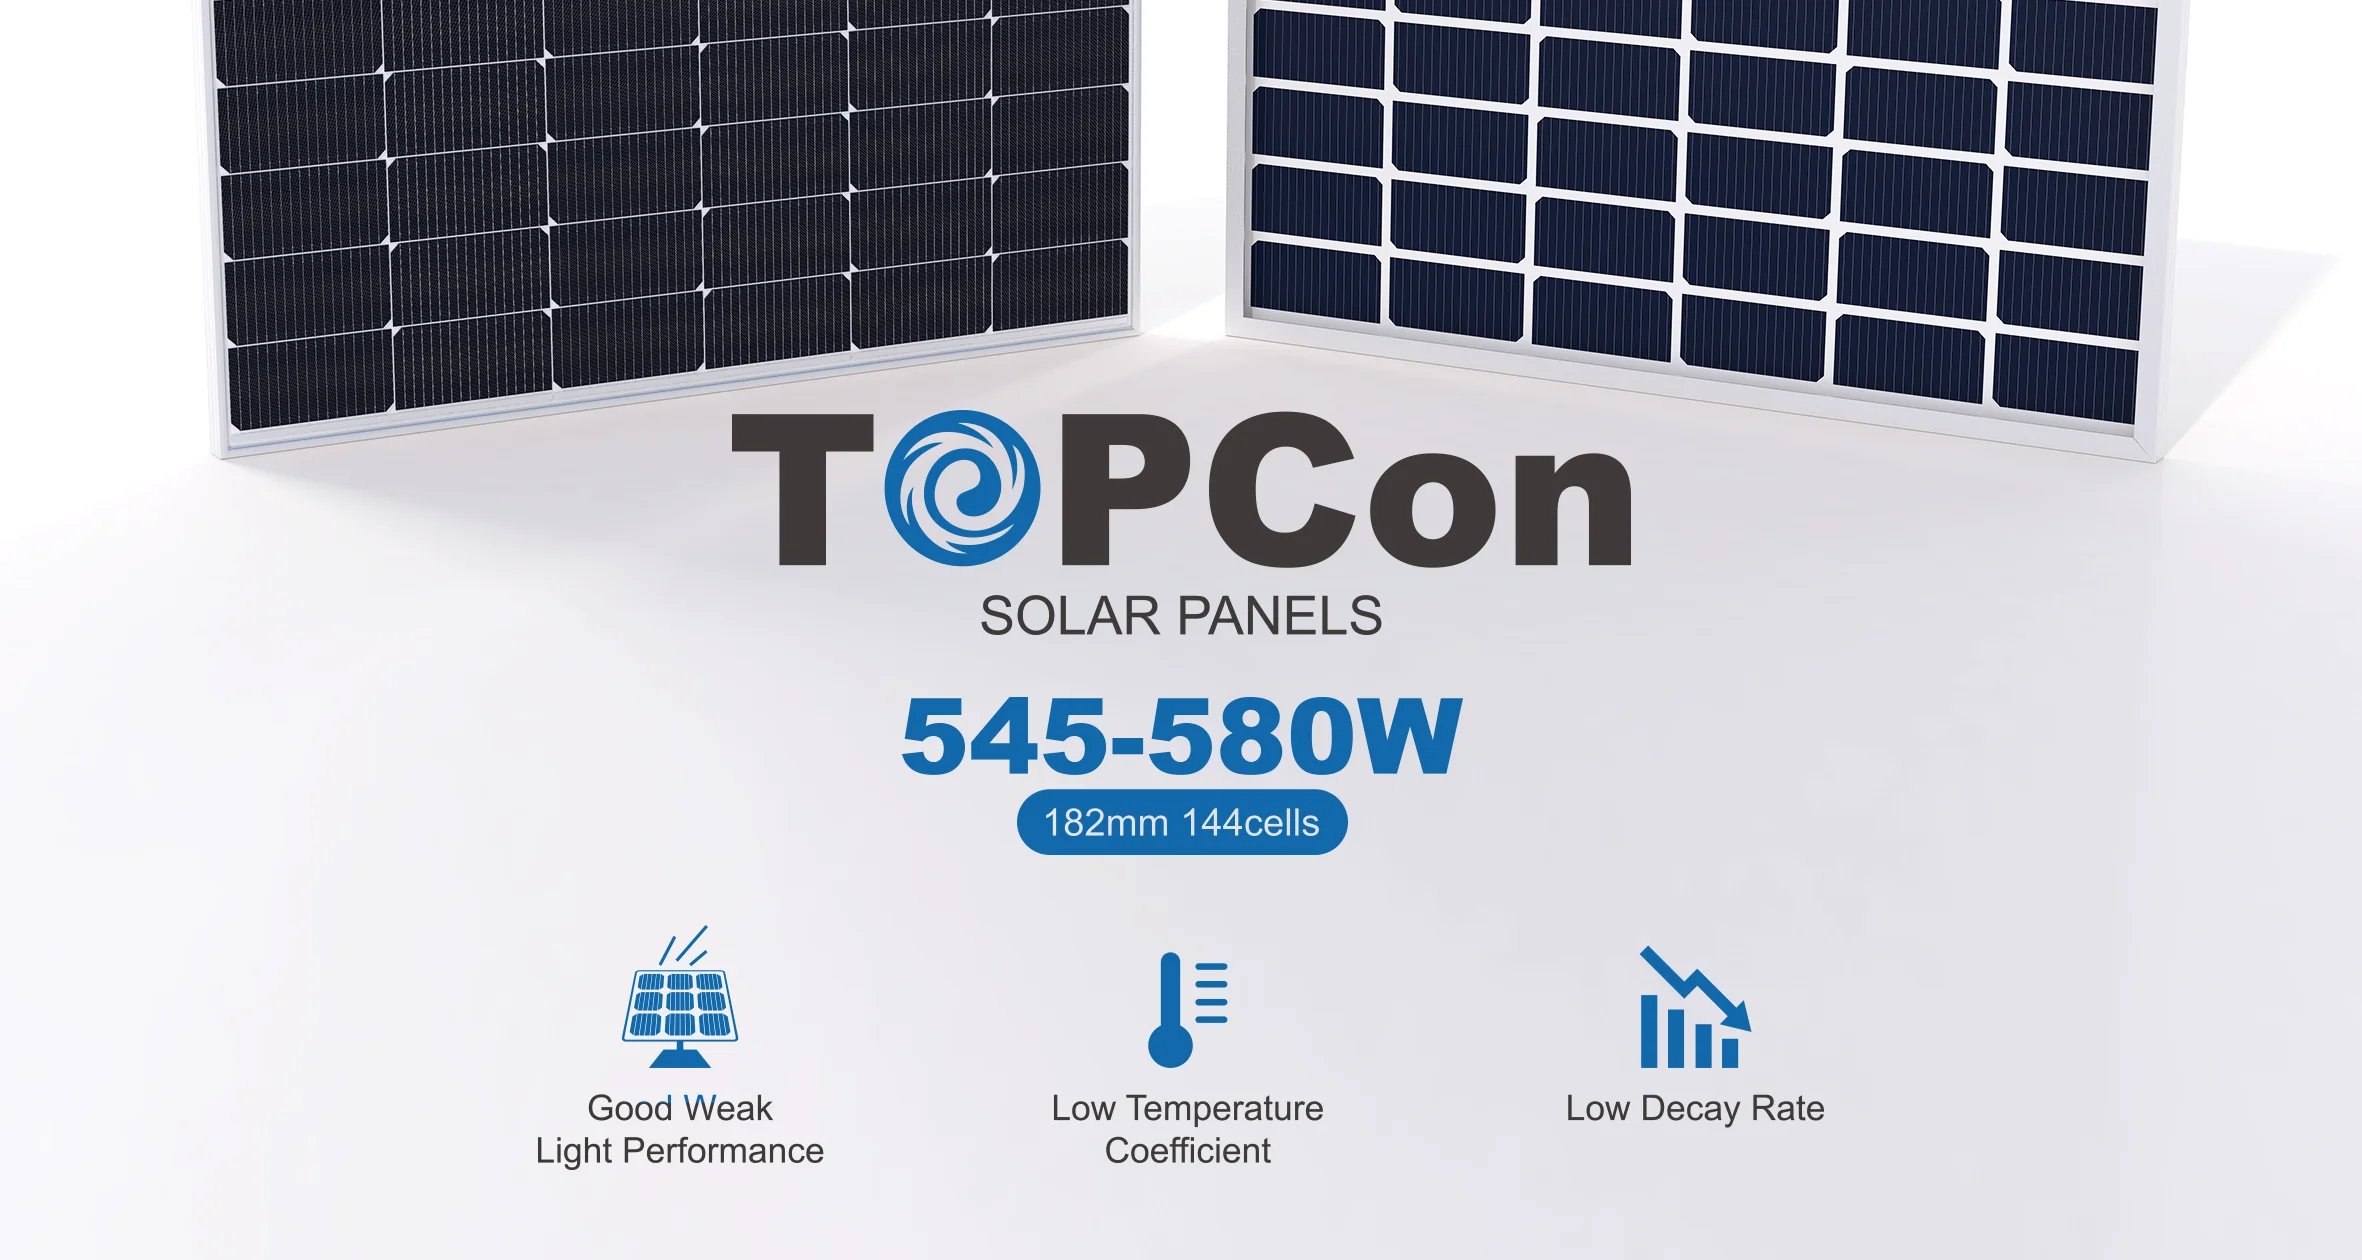 Sunket Hight Quality Pv Modules 430w 182mm 108cells All Black Topcon ...